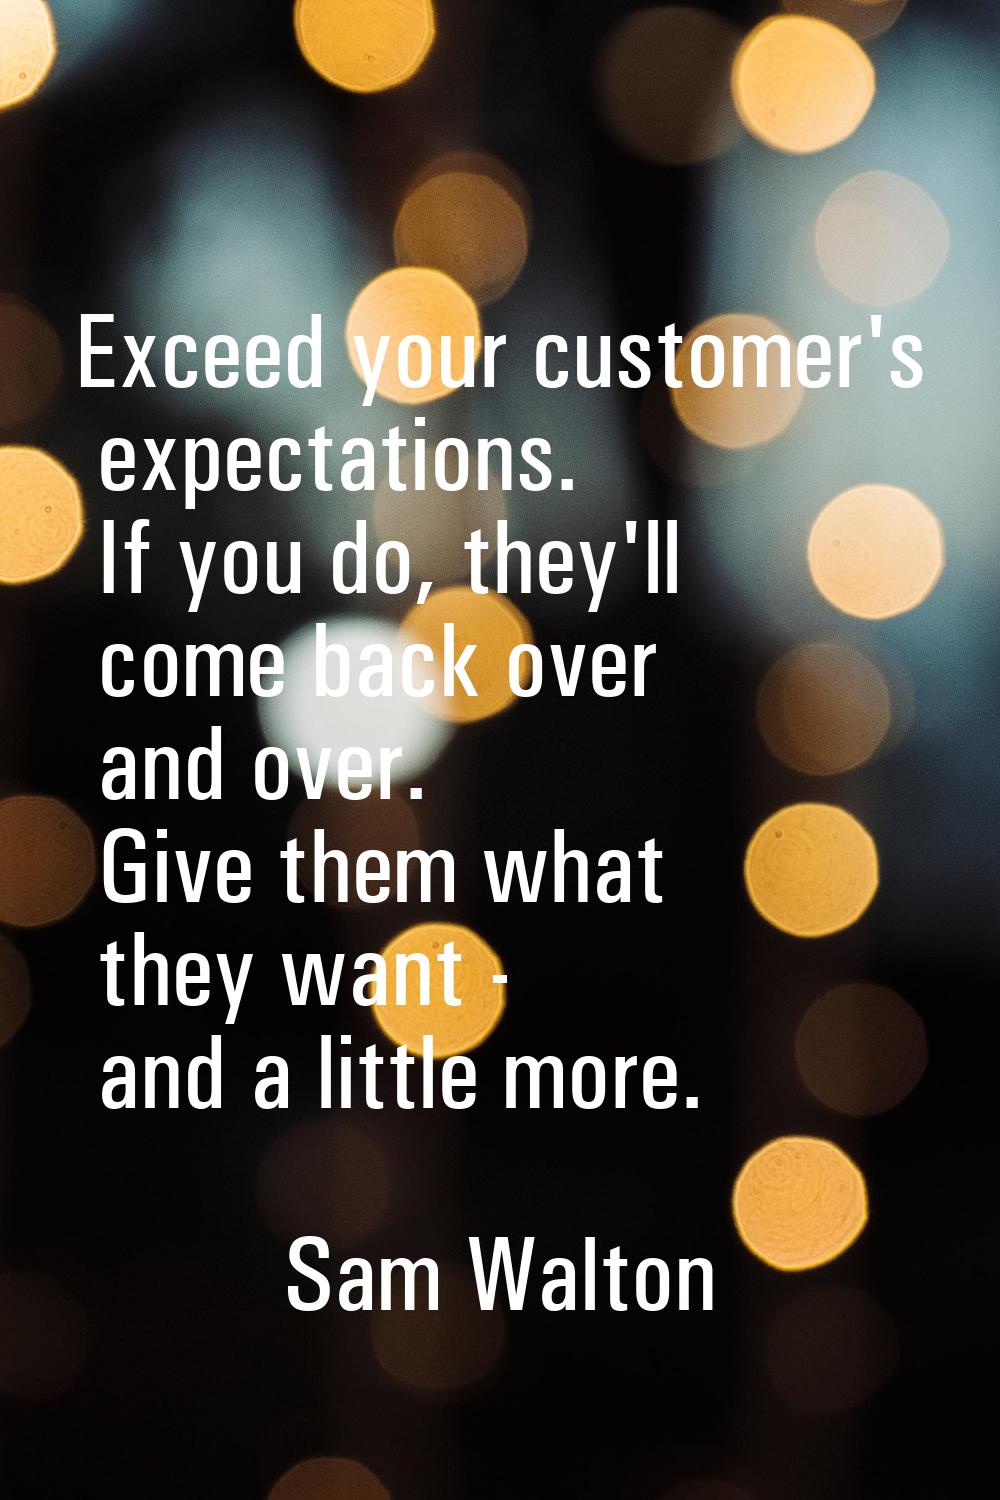 Exceed your customer's expectations. If you do, they'll come back over and over. Give them what the